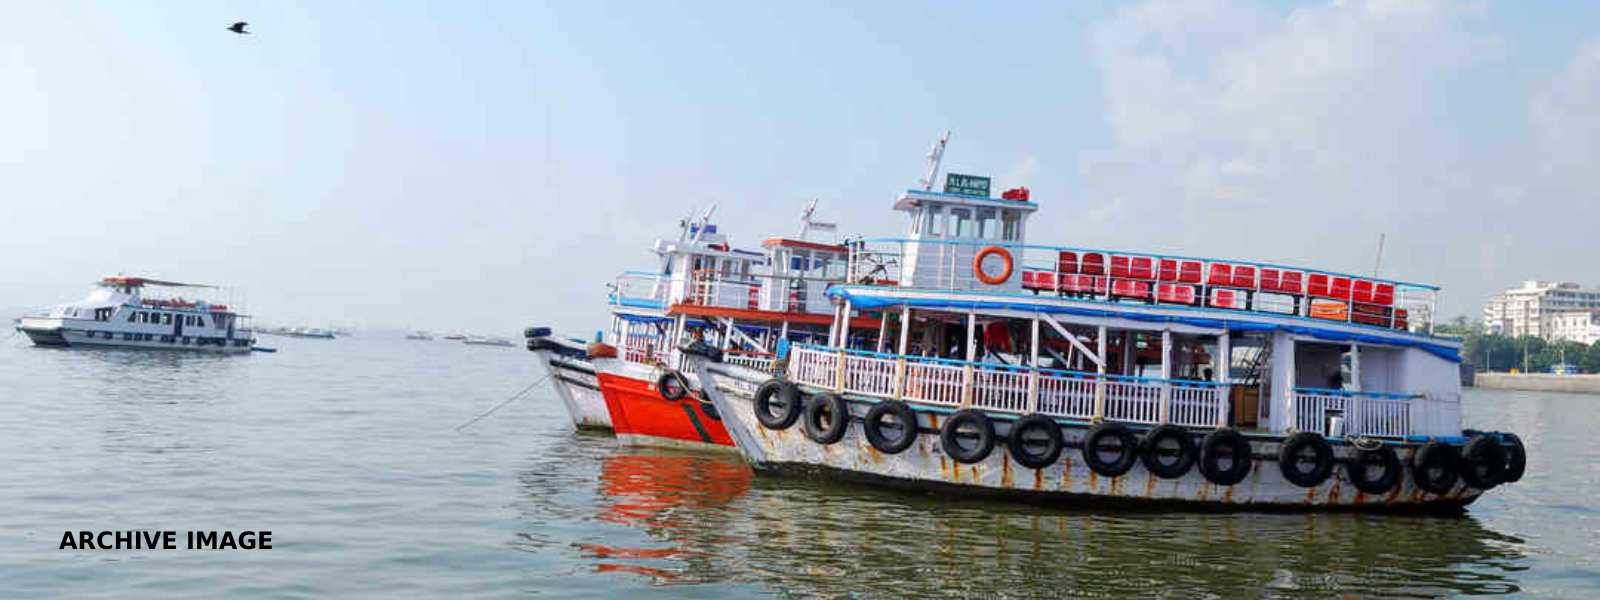 Passenger ferry service from Tamil Nadu to Sri Lanka likely from Oct first week